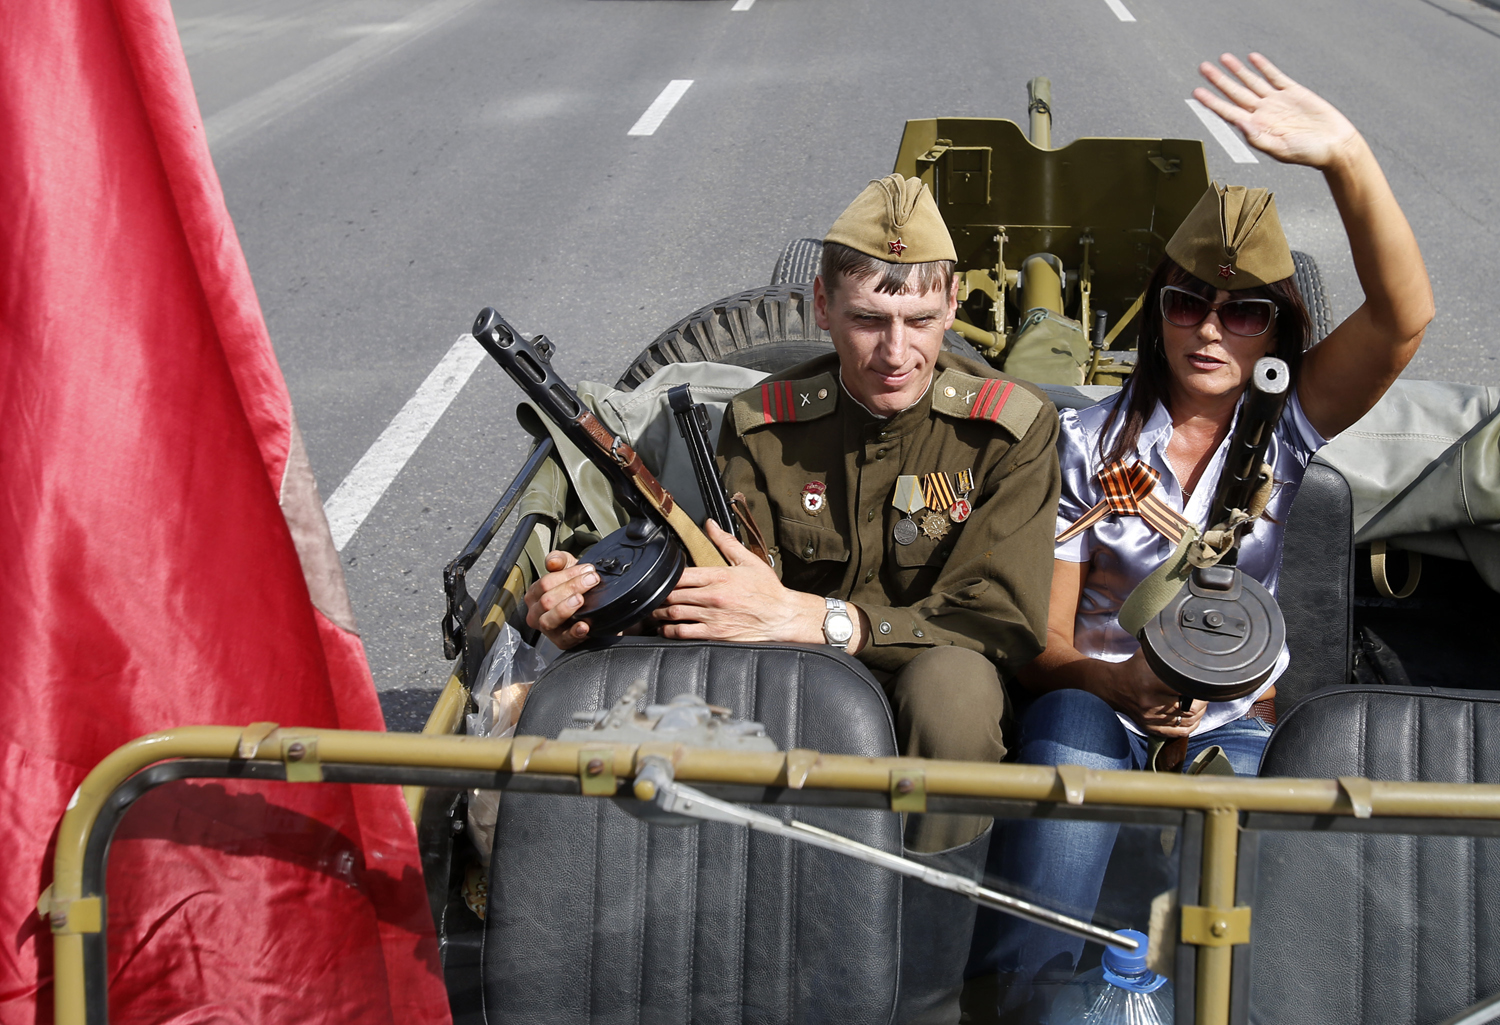 People dressed in old Soviet uniforms attend a parade in the town of Luhansk, eastern Ukraine, on Sept. 14, 2014 (Darko Vojinovic — AP)